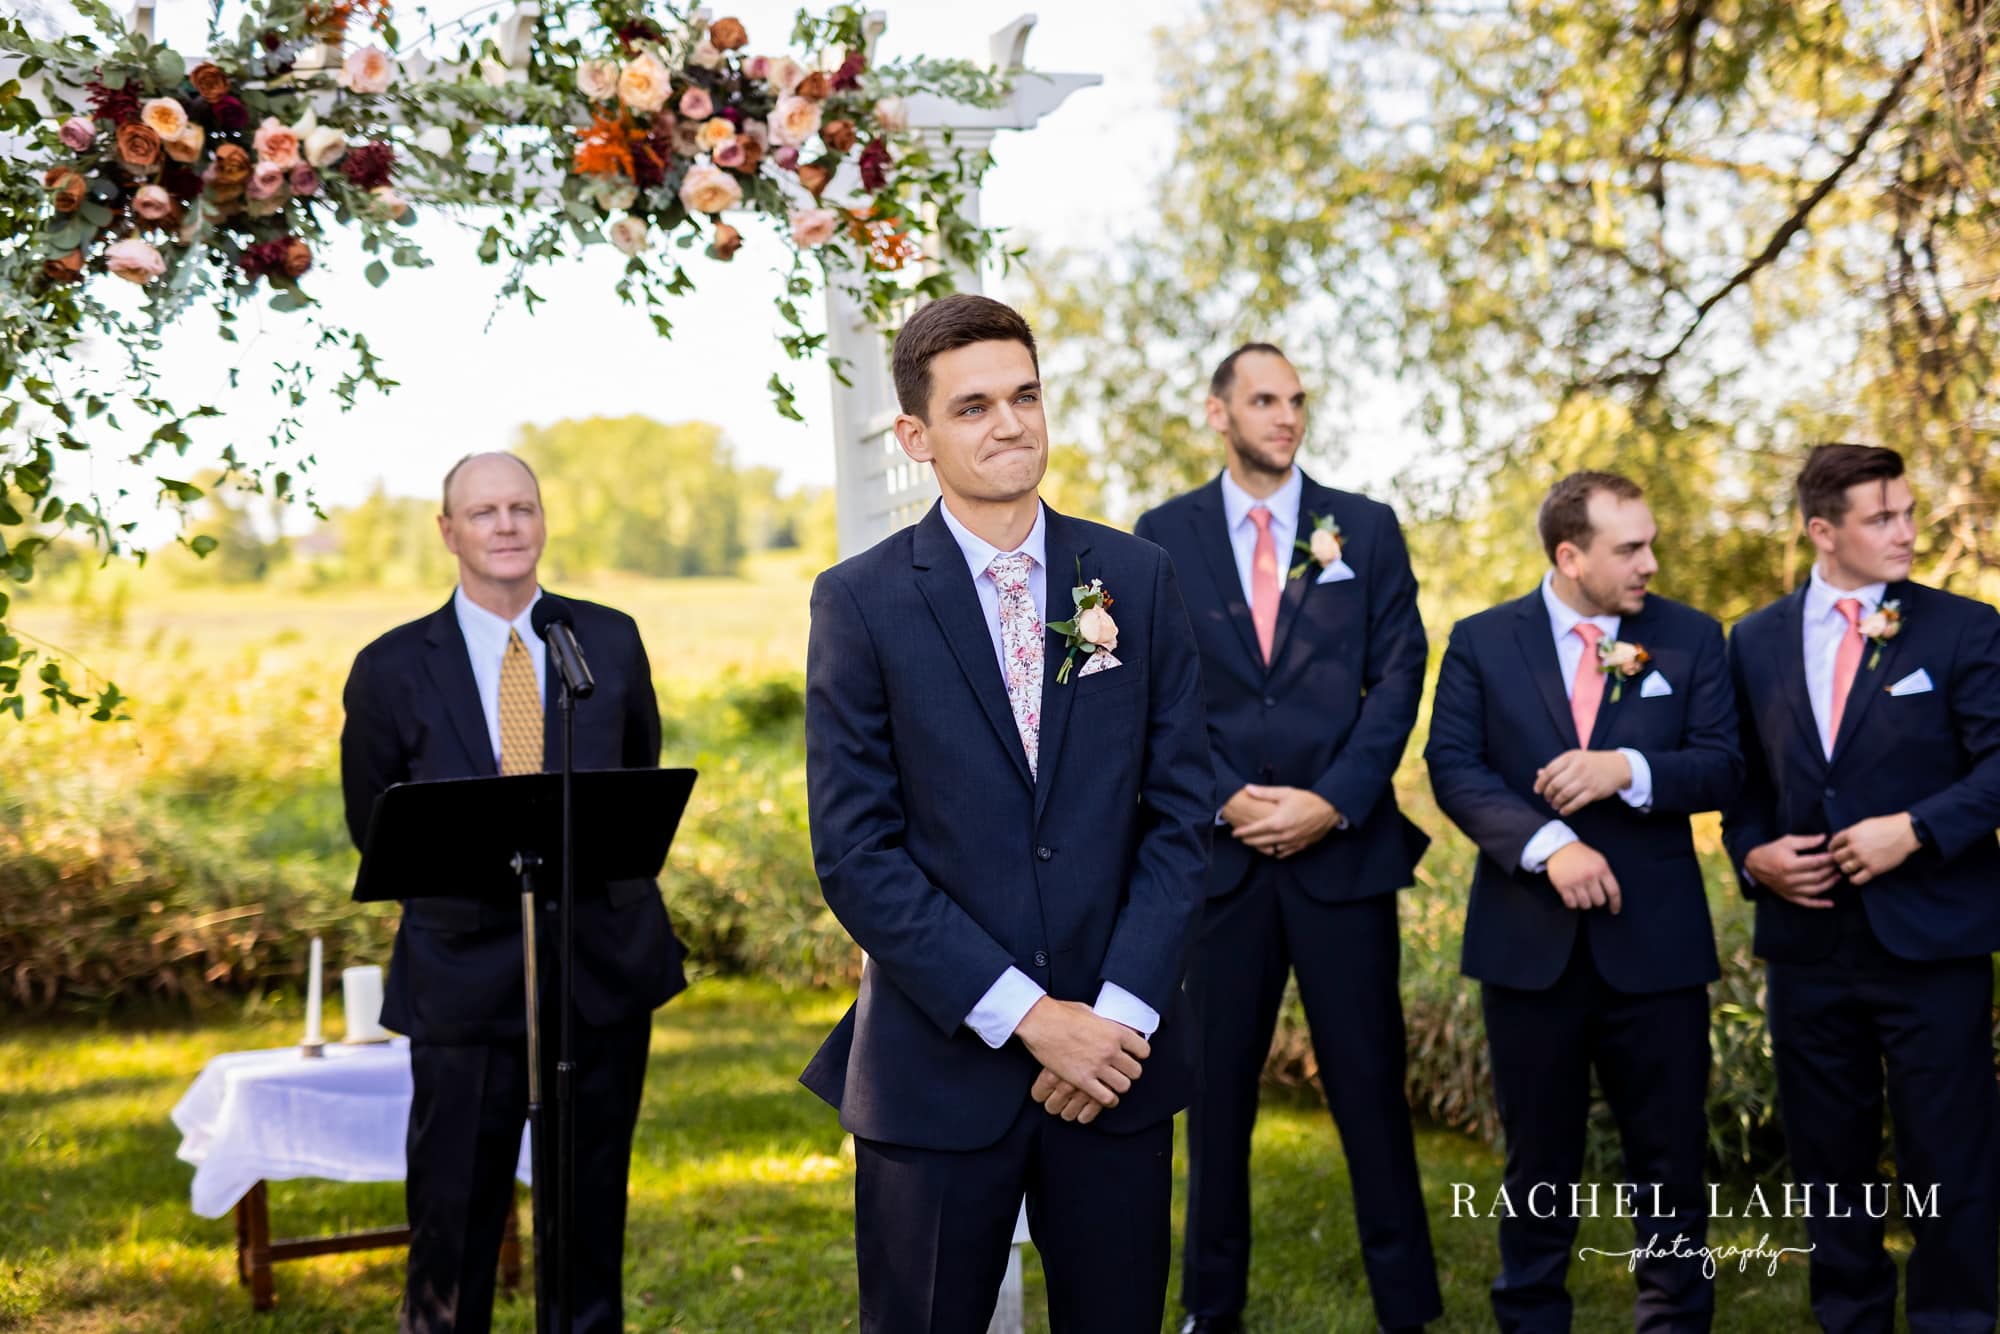 Groom watches bride walk down the aisle during outdoor wedding ceremony at the Cottage Farmhouse in Glencoe, Minnesota.